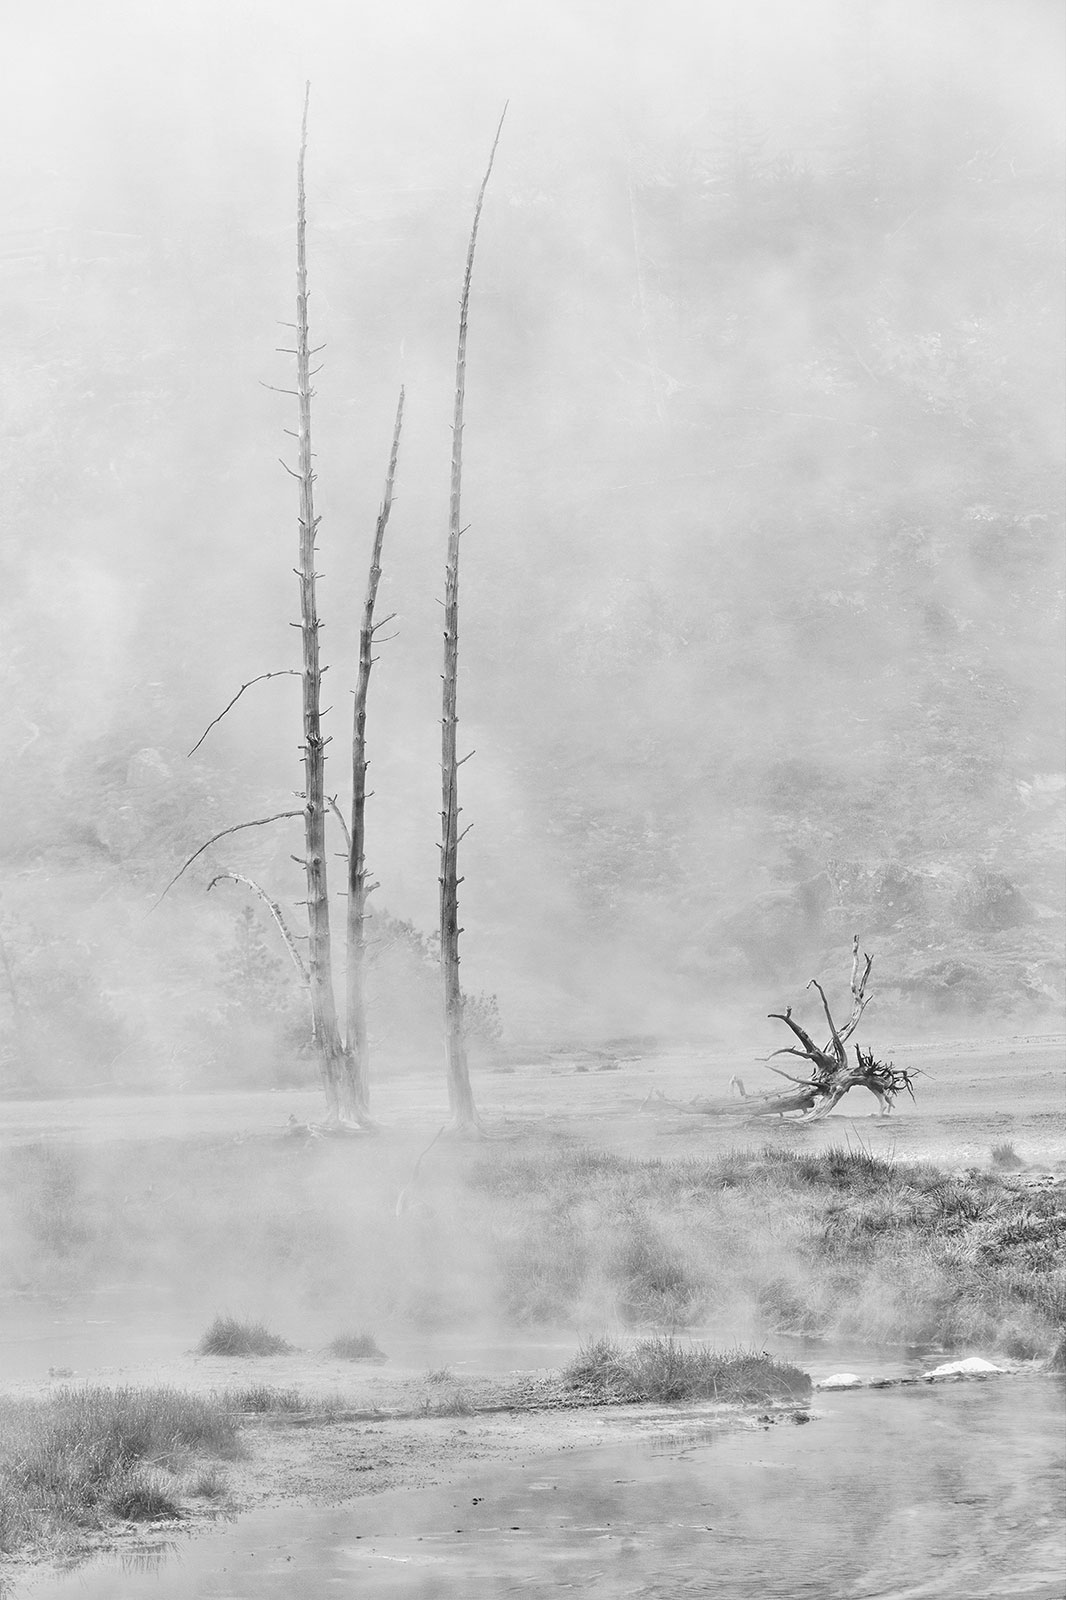 Deadt trees in the morning fog mist Yellowstone-Apparition